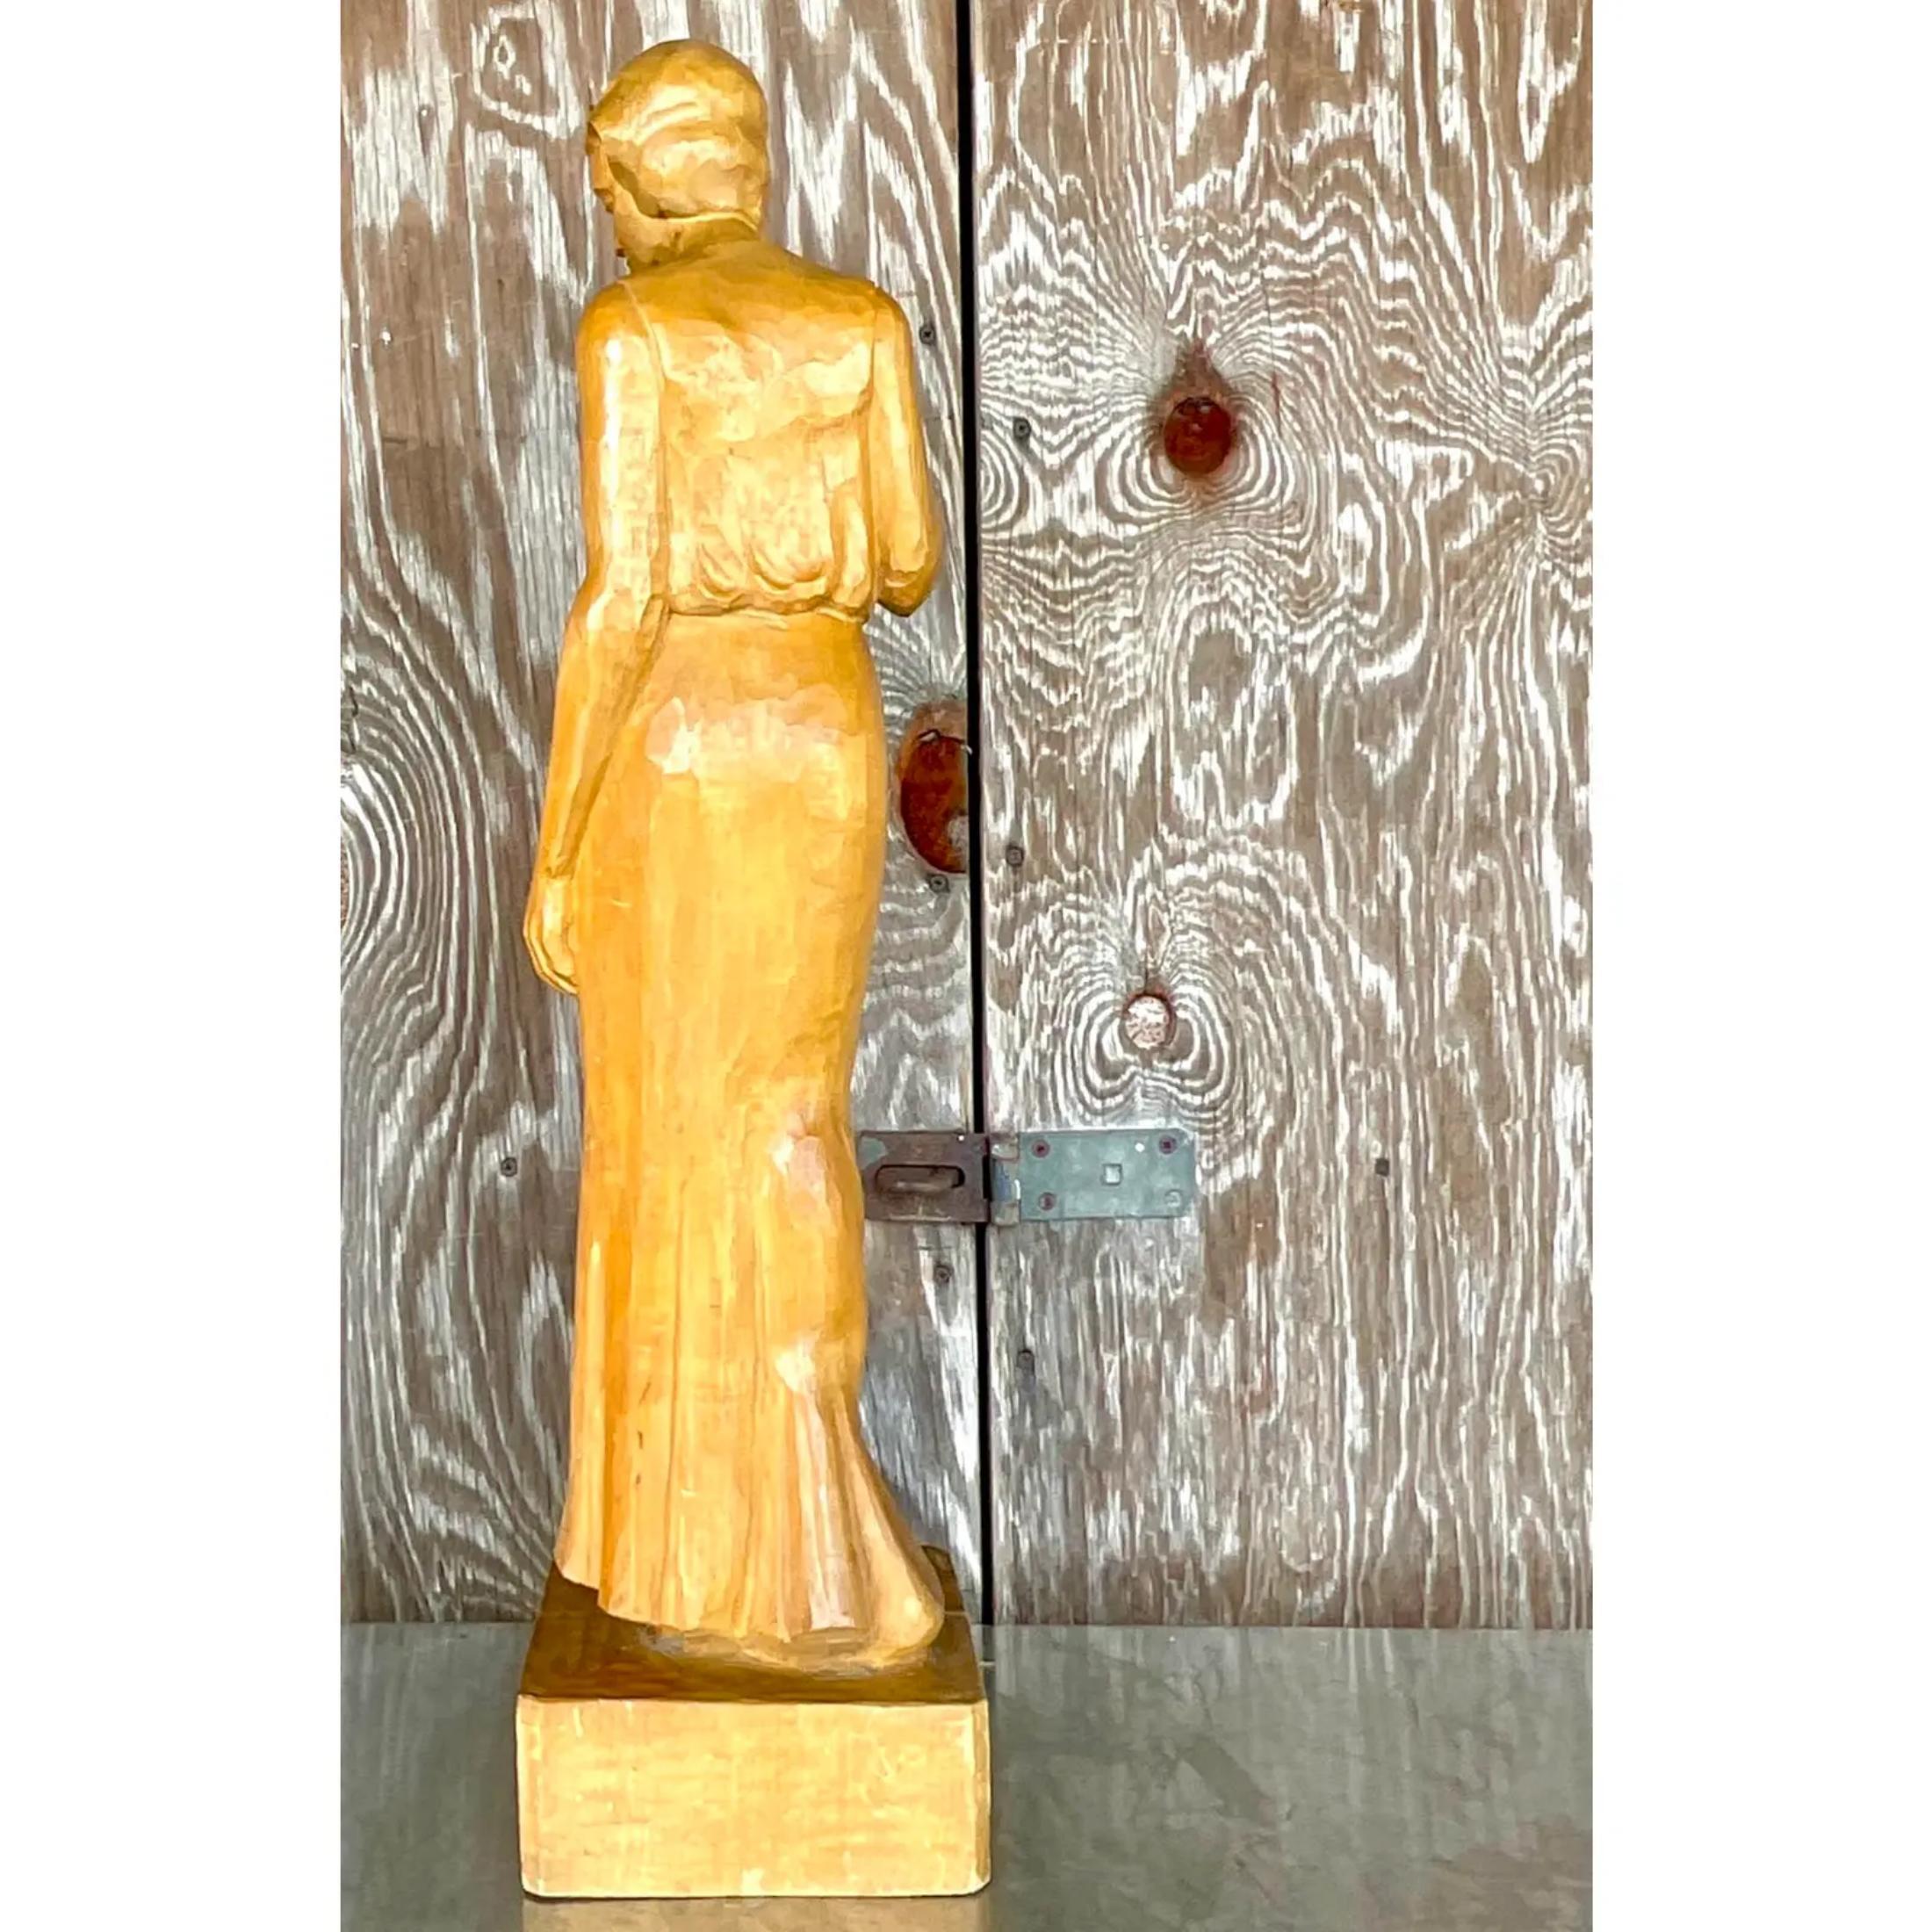 A stunning vintage Boho sculpture. A hand carved statue of a woman. Beautiful patina to the wood from time. Acquired from a Palm Beach estate